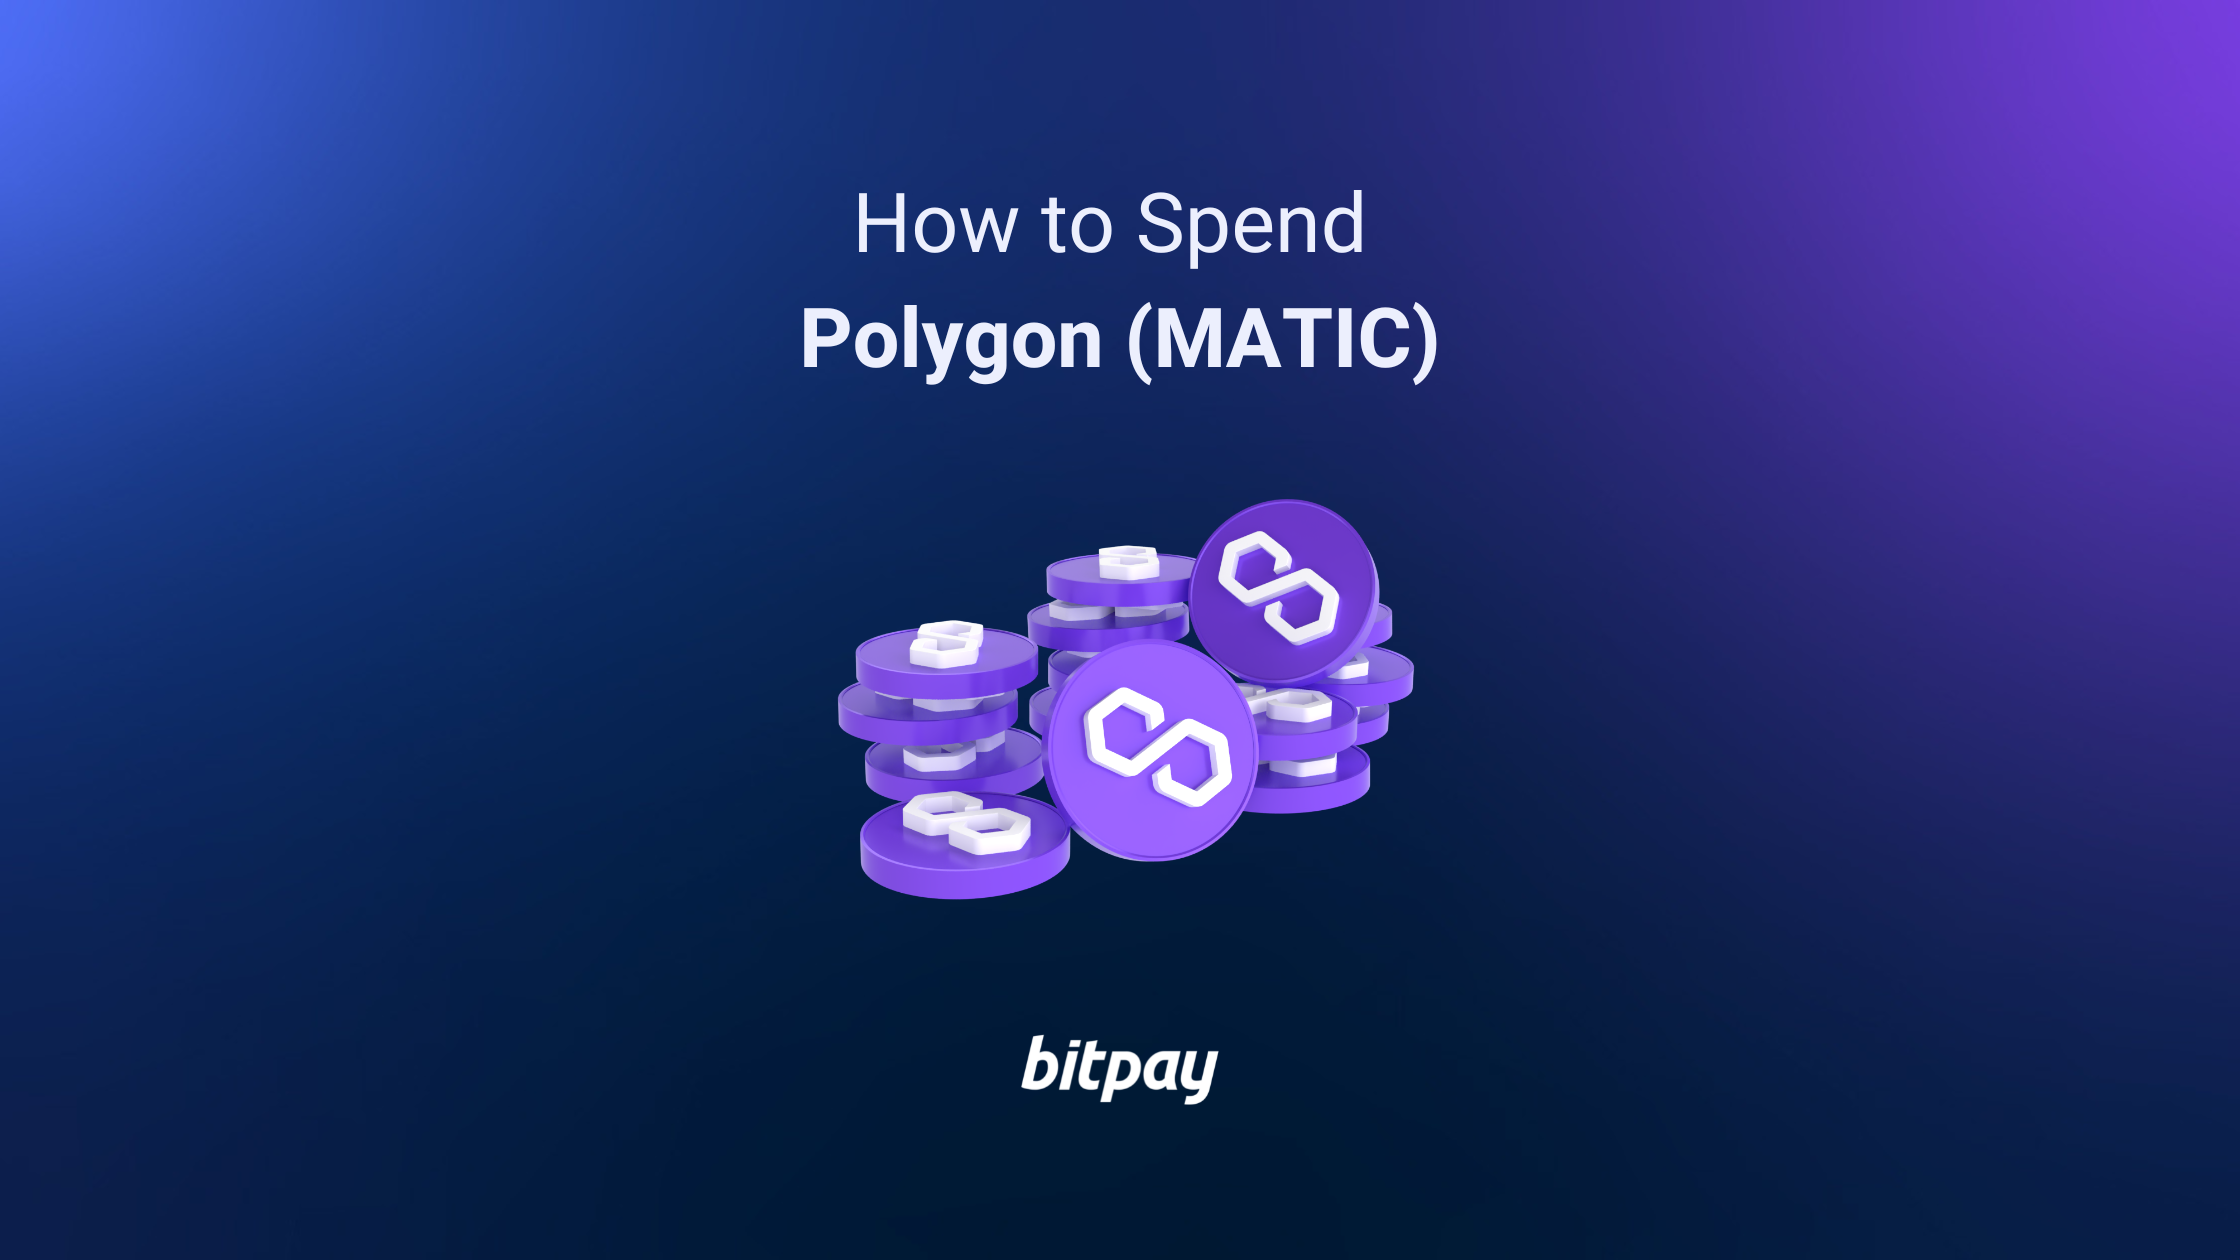 Spend Polygon: 11+ Places that Accept Polygon (MATIC)